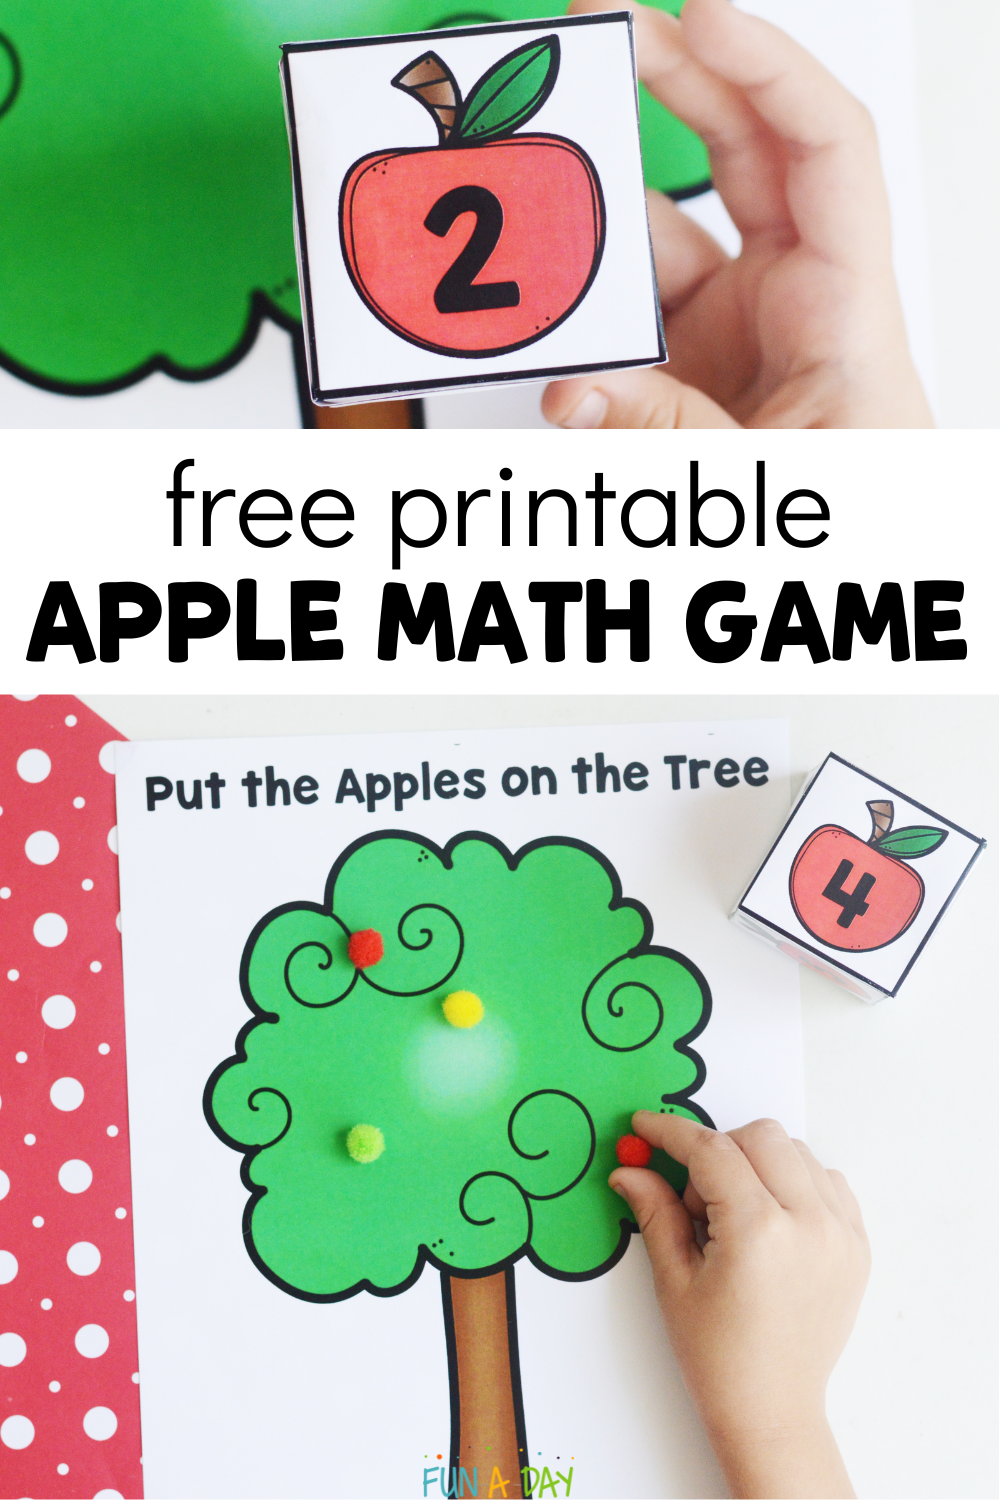 Preschooler holding number cube and playing math game, with text that reads free printable apple math game